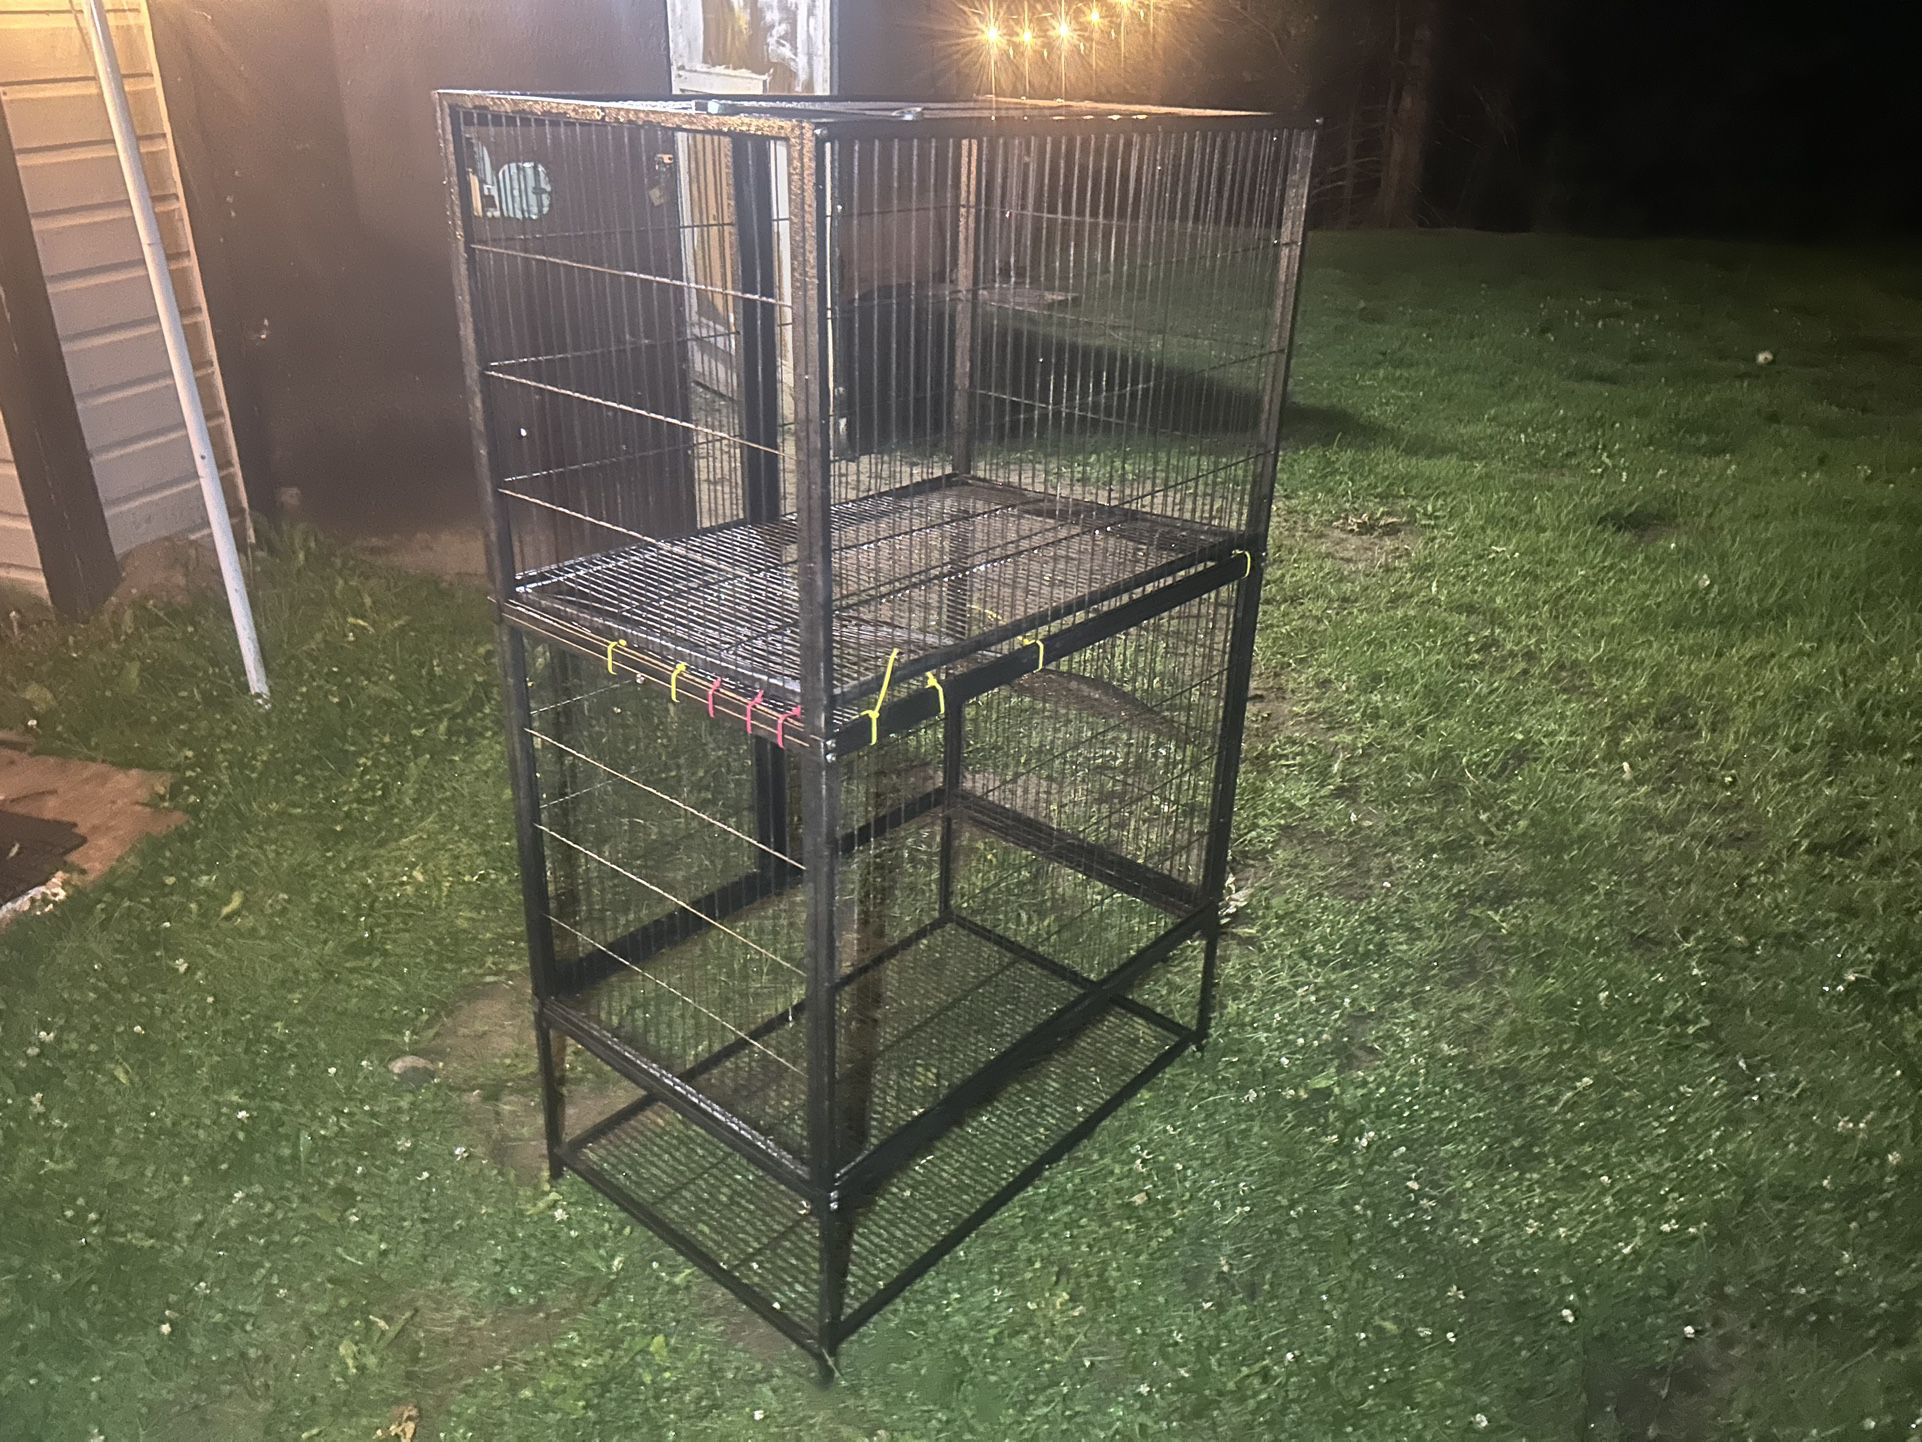 Cage  Price Reduced Again